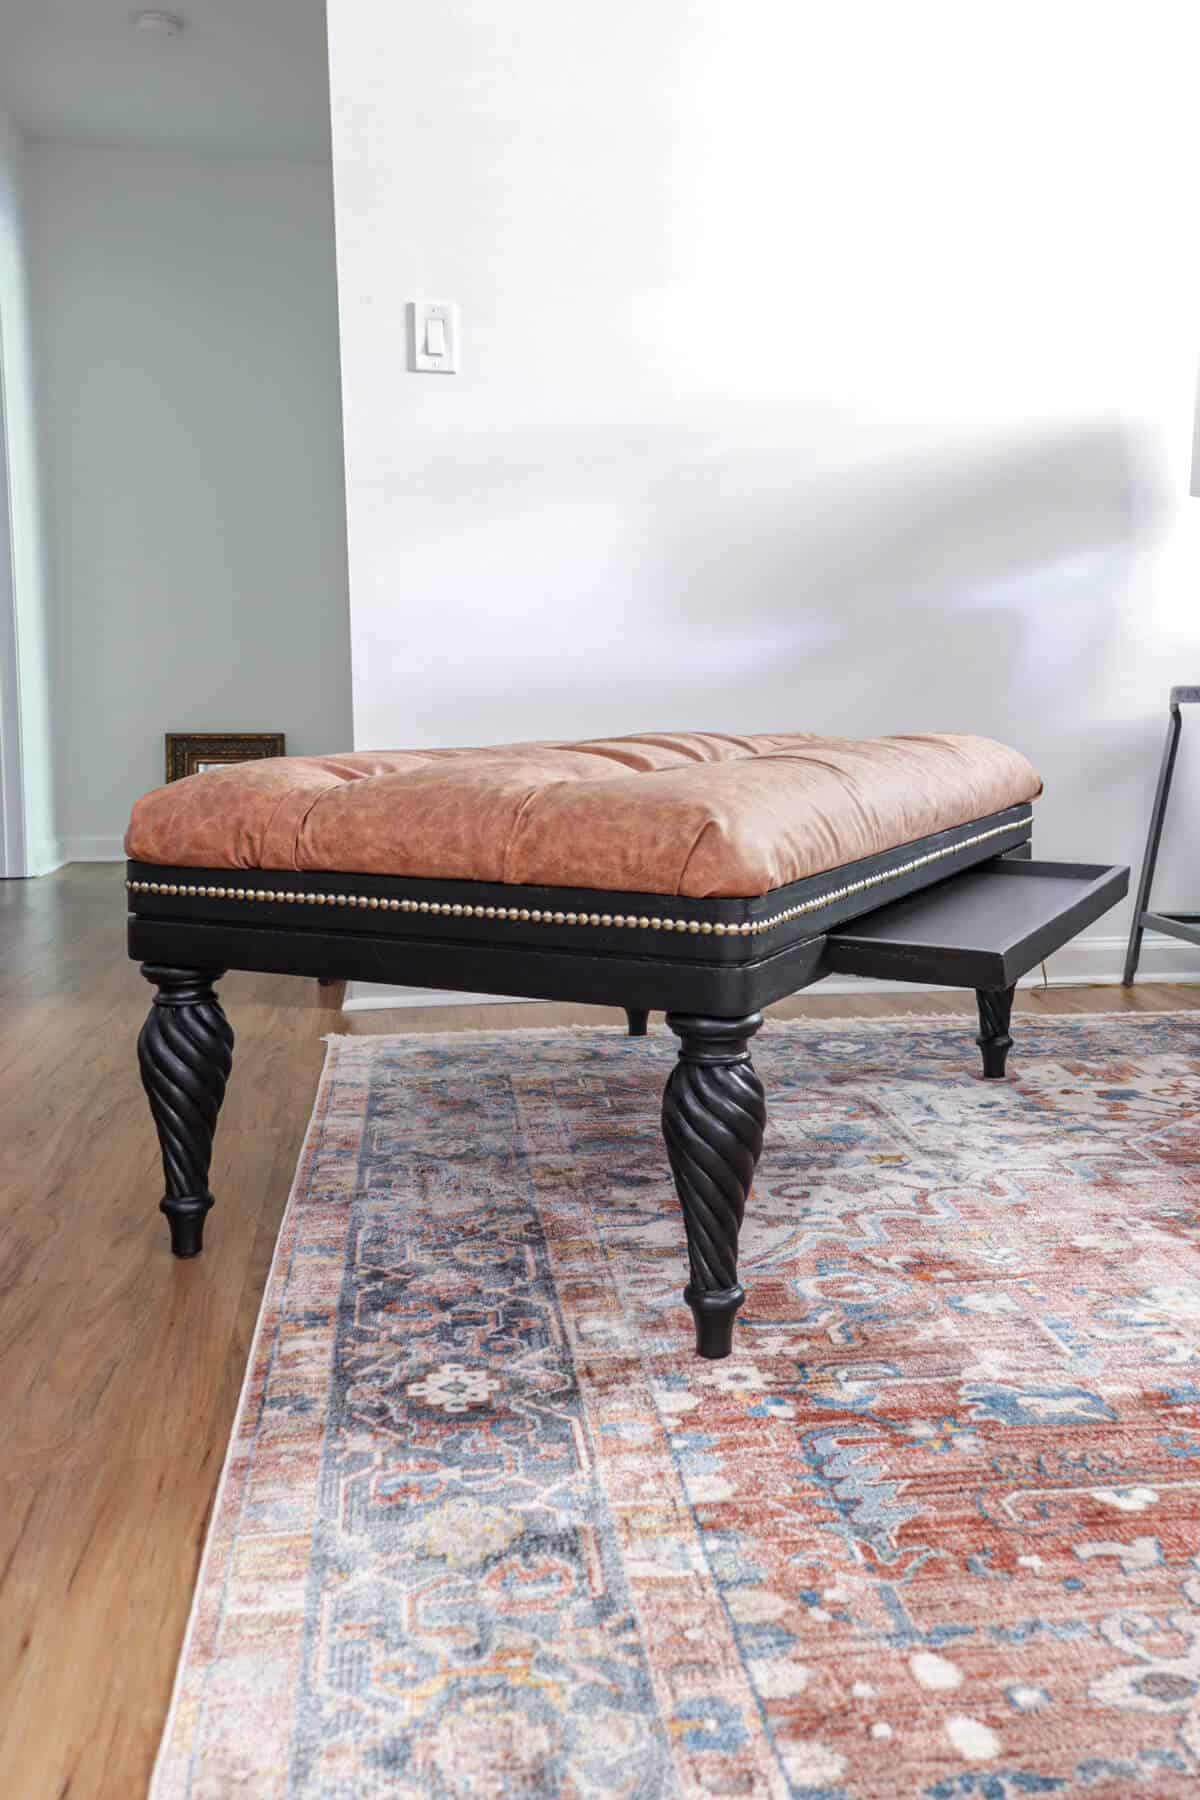 How to Reupholster an Ottoman